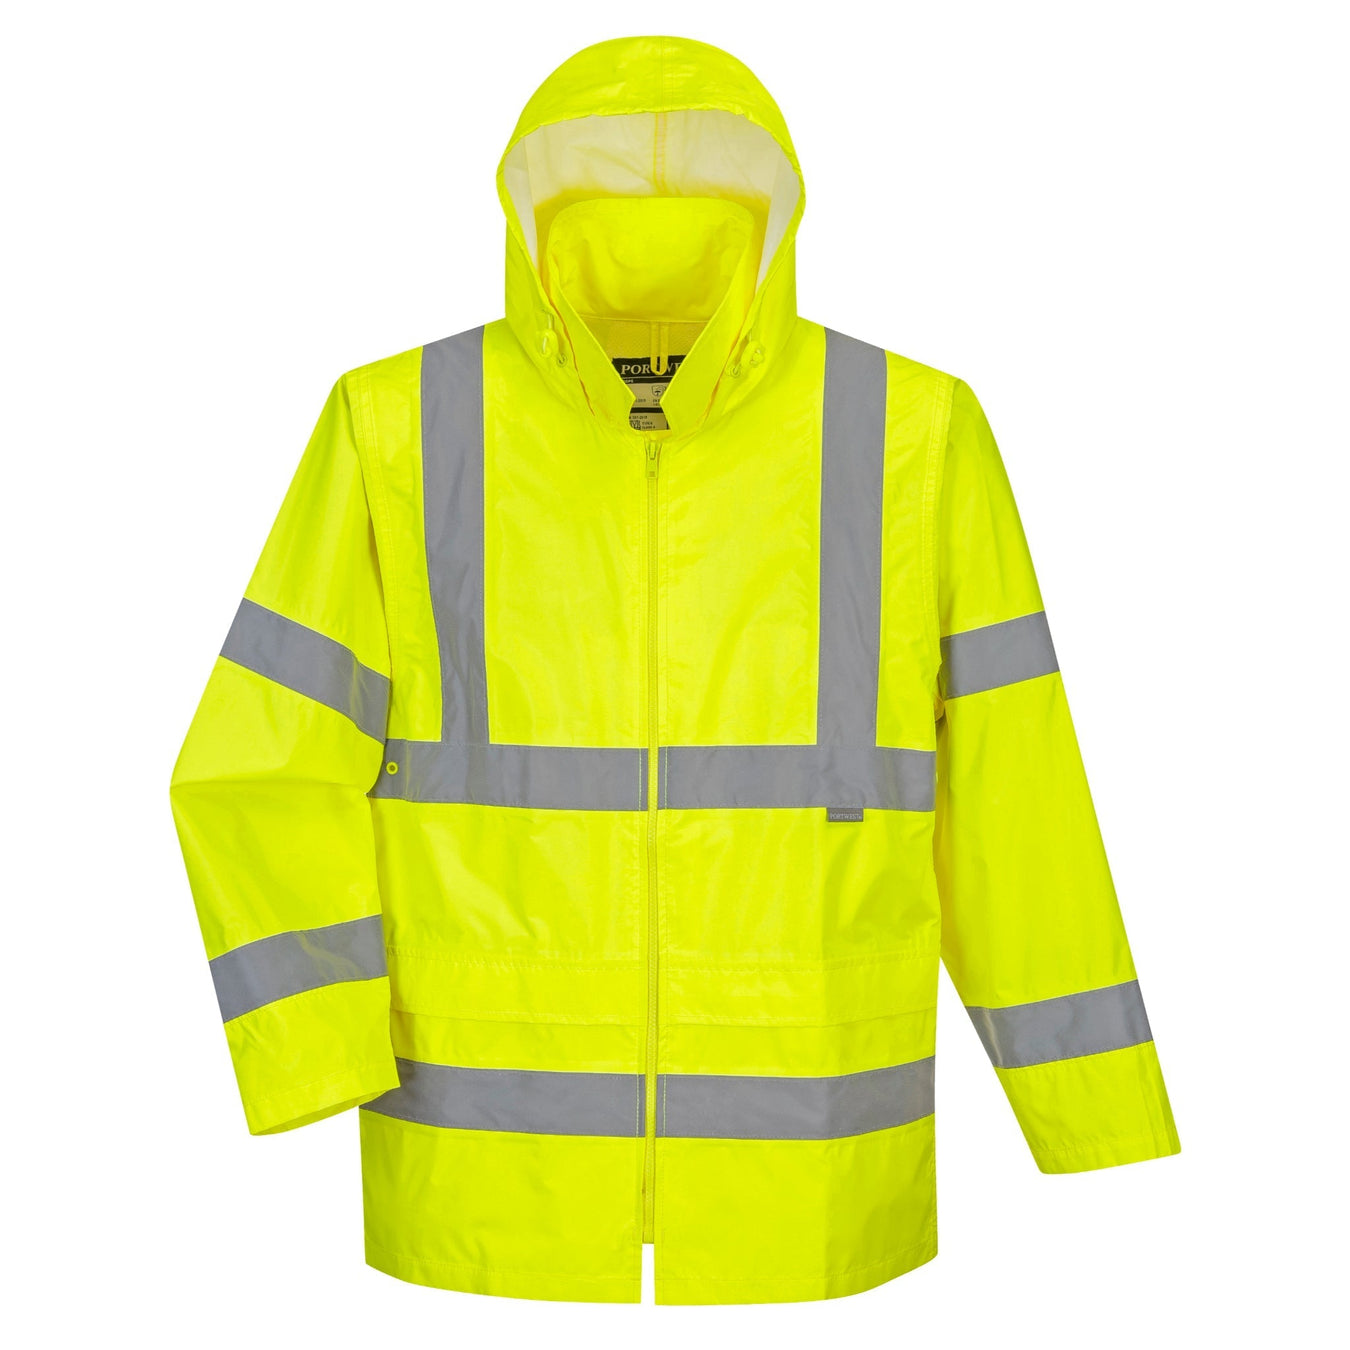 Portwest High Visibility Jackets